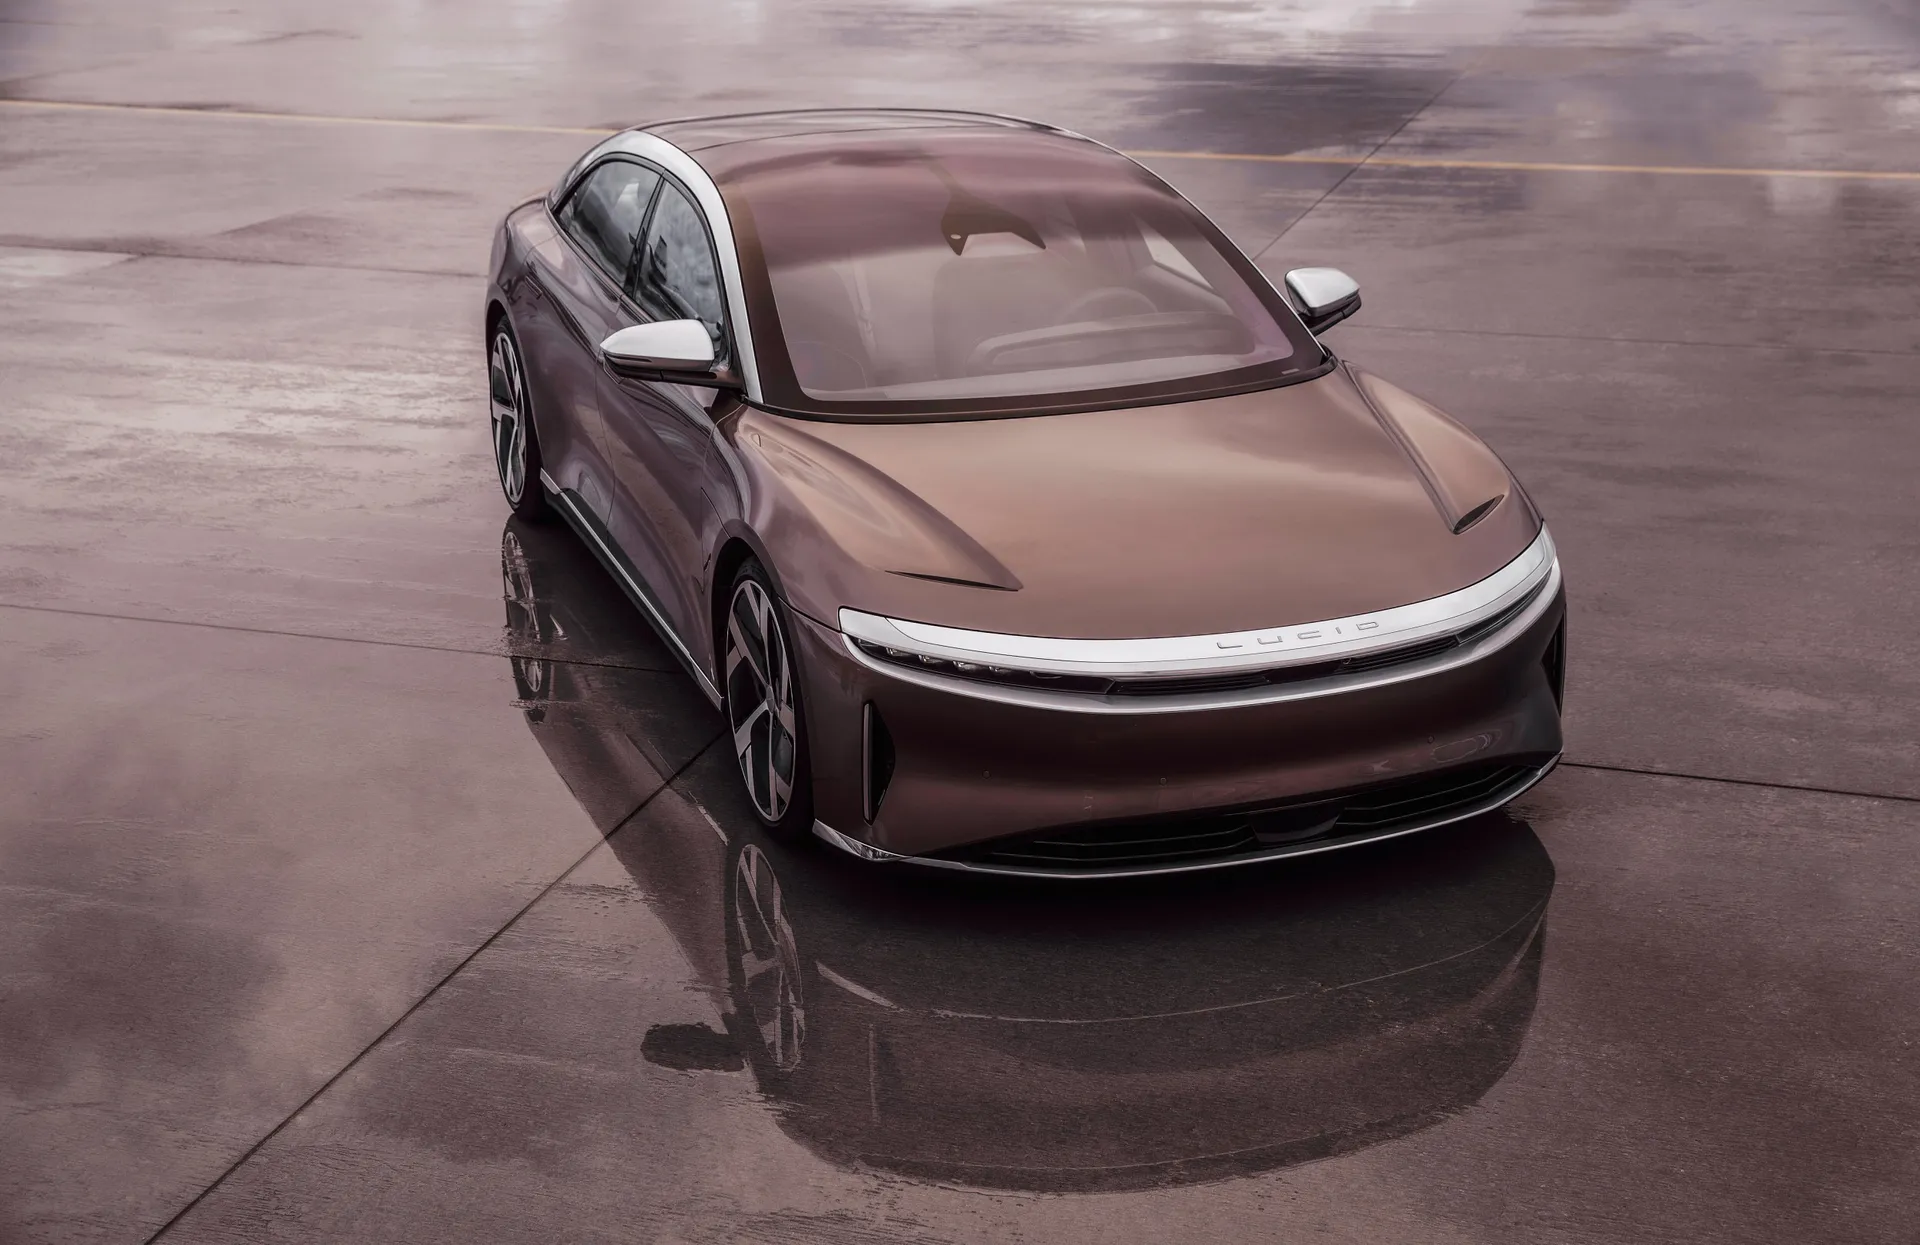 Exciting Changes Ahead: Tesla Plans New Affordable Cars in 2025 Despite Budget Challenges